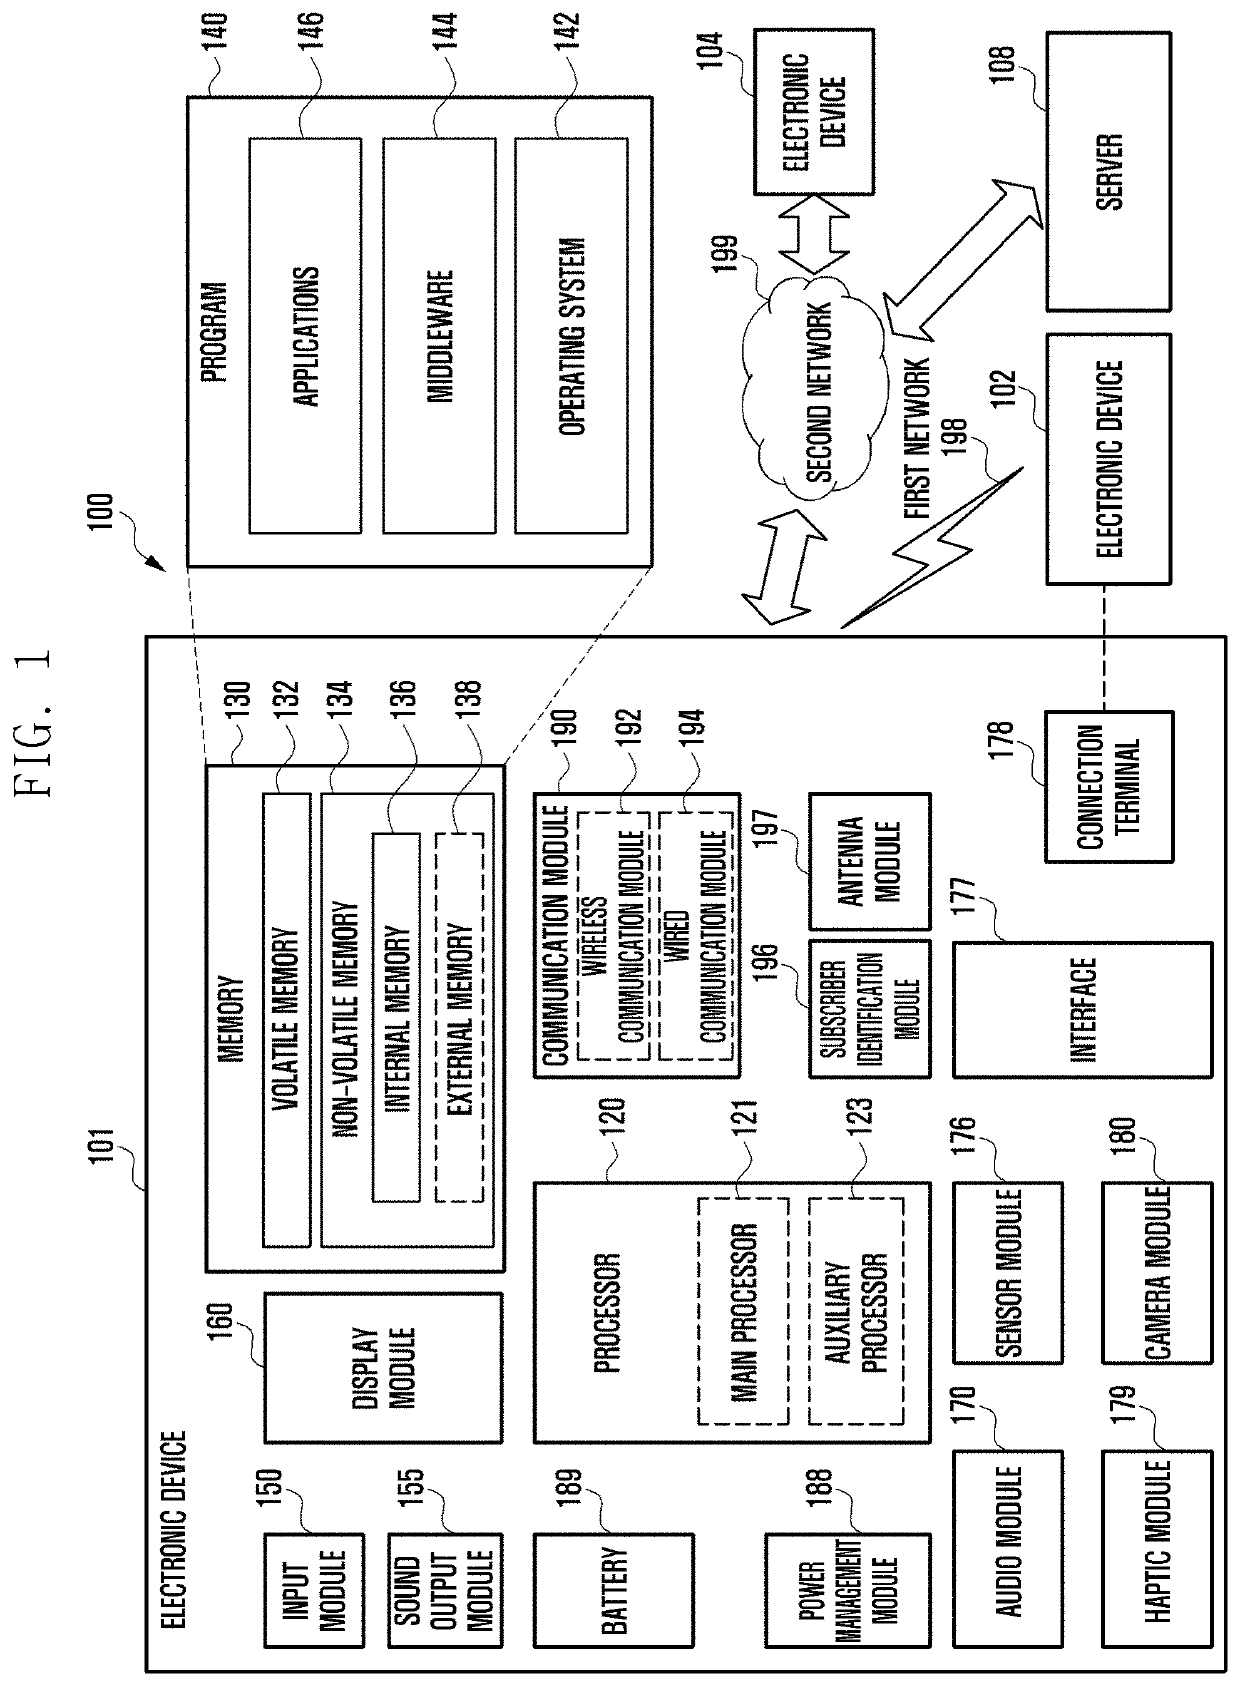 Method and apparatus for controlling connection of wireless audio output device